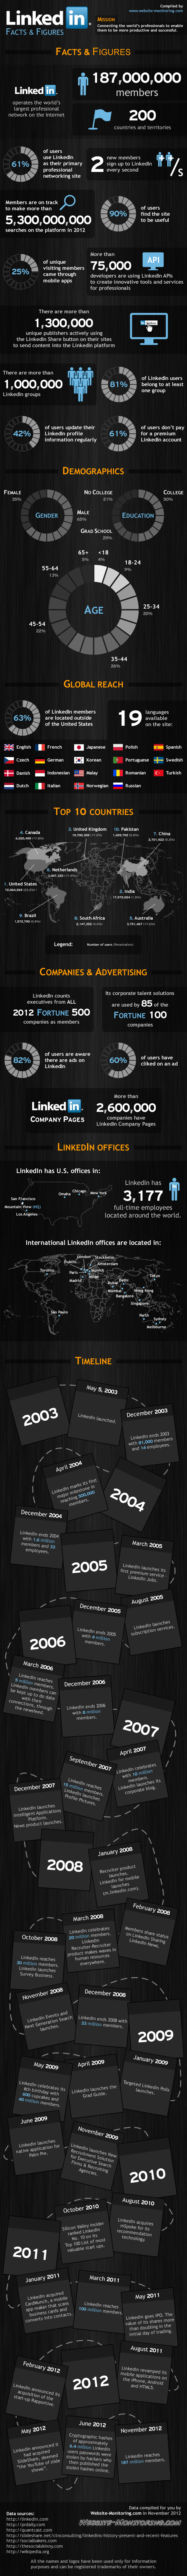 Infographic - LinkedIn Facts & Figures